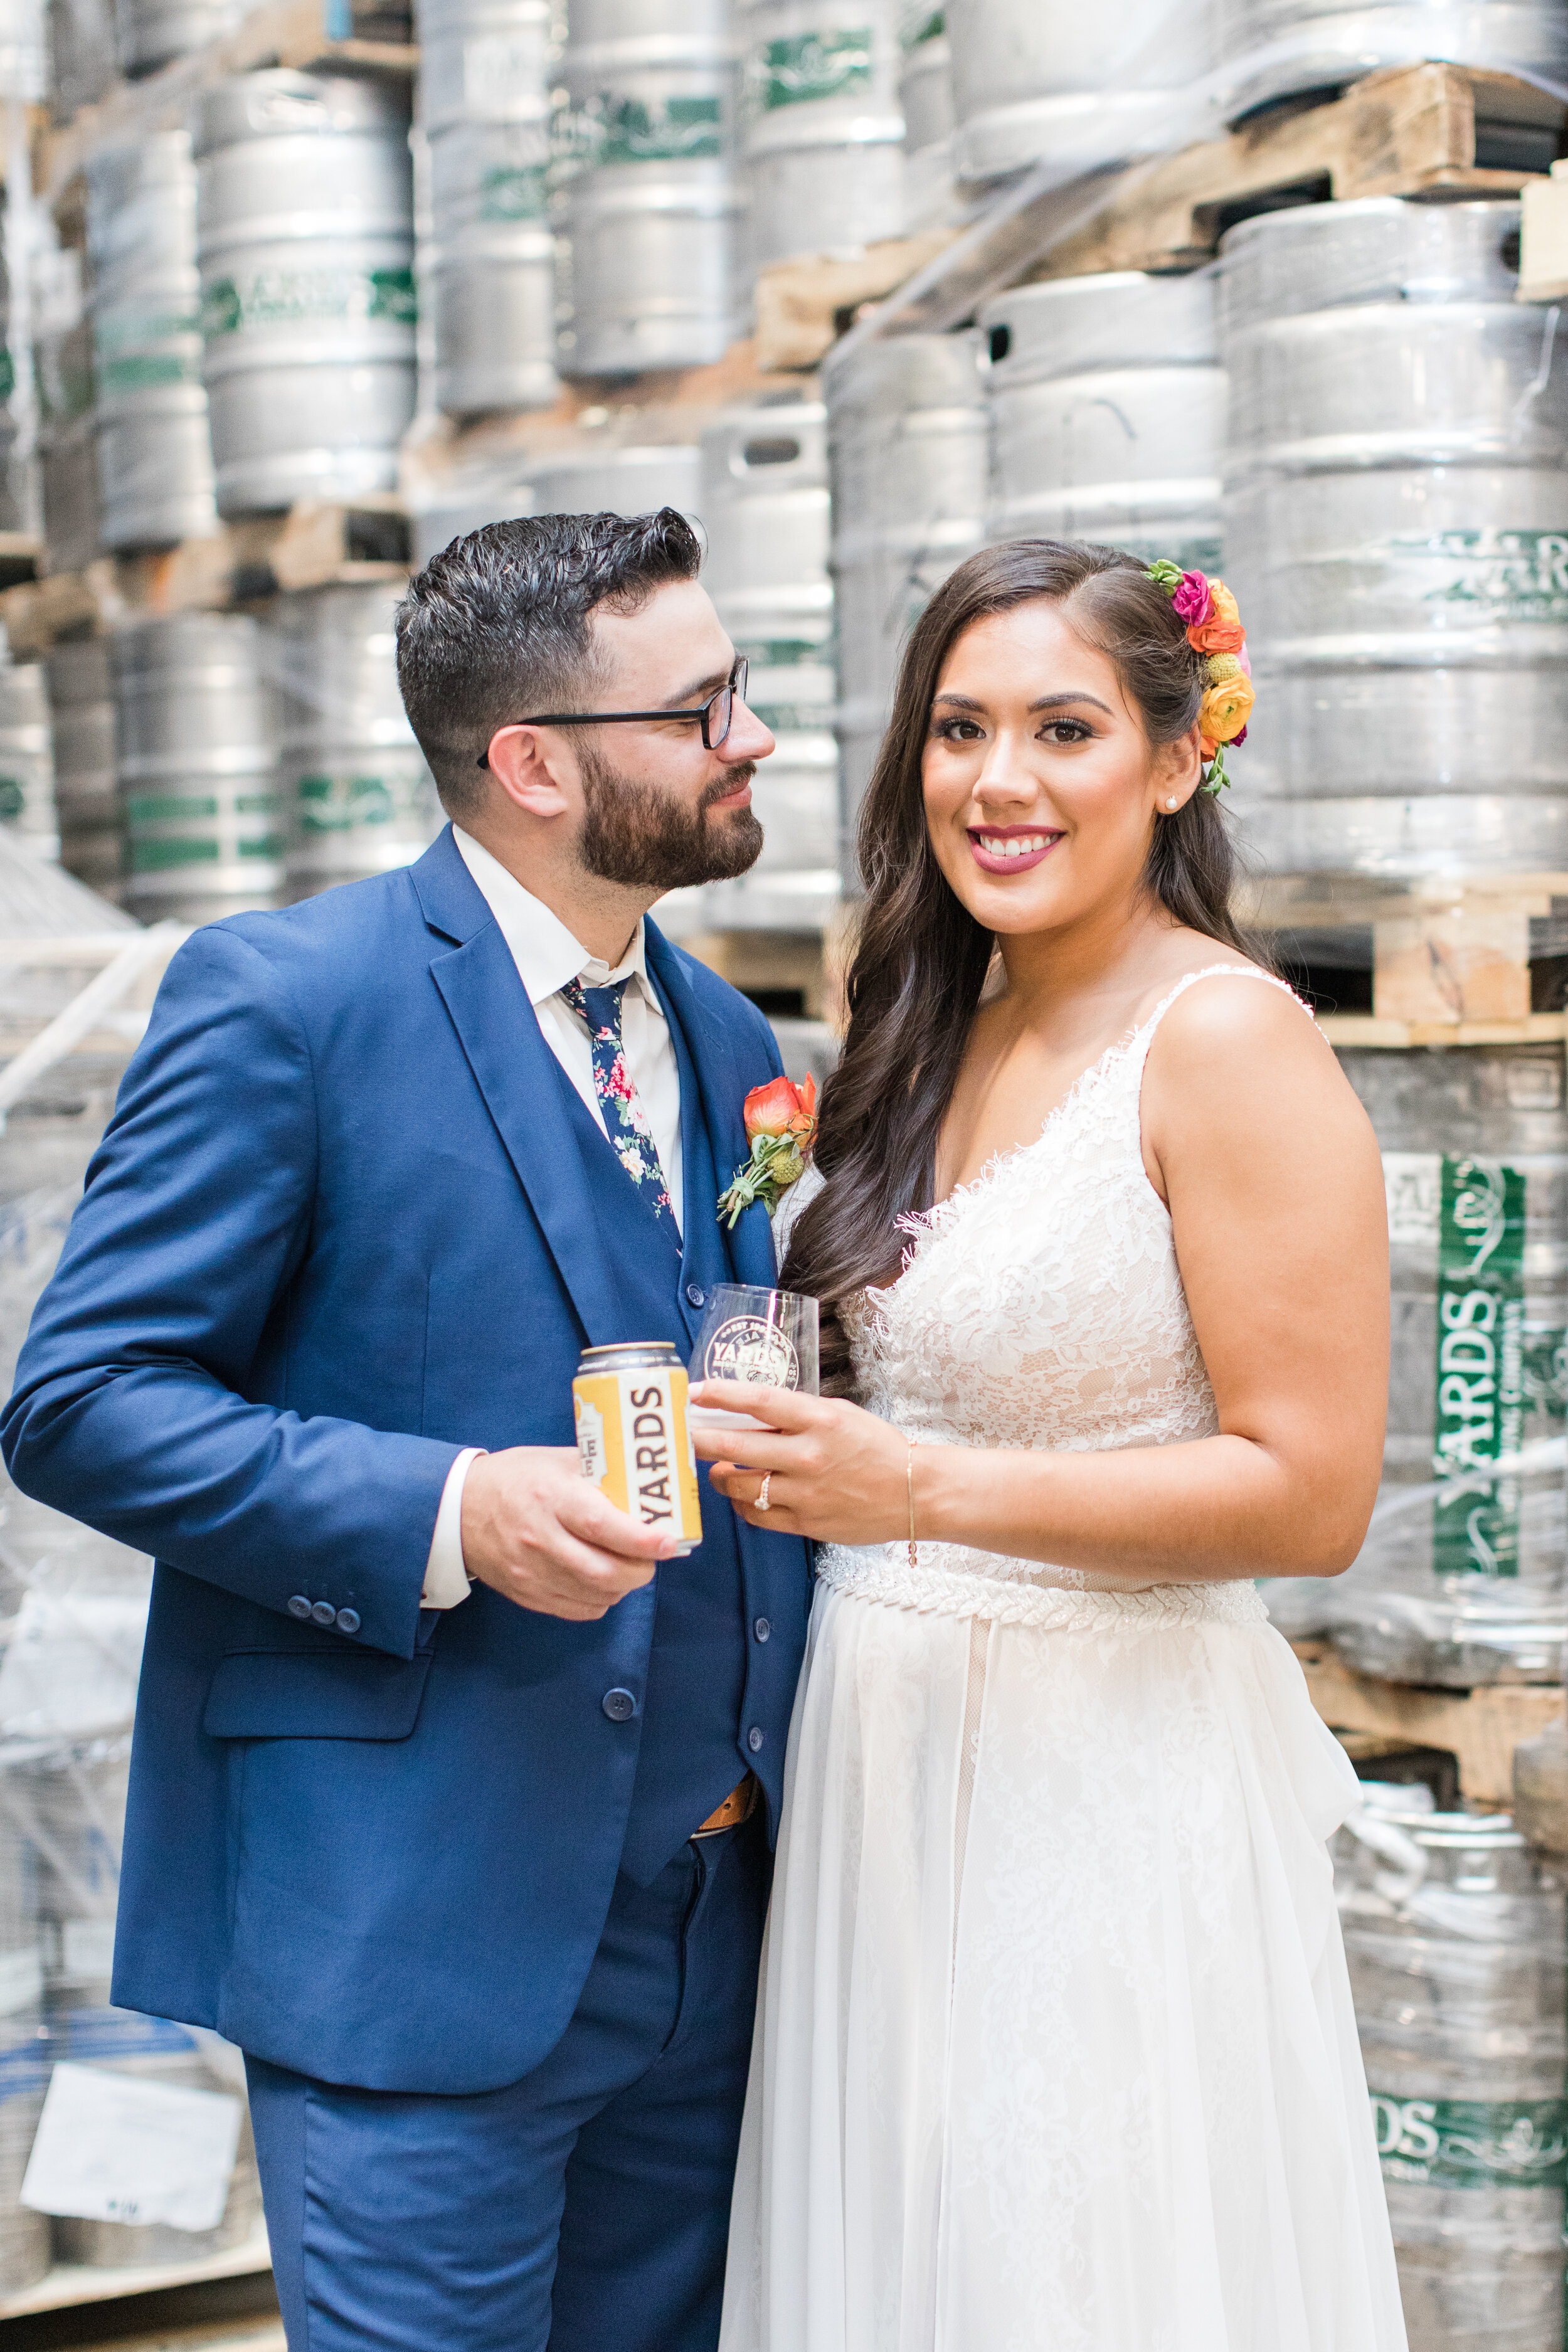 Kelly Pullman photography photographed this summery whimsical wedding featuring the June Fete Fairgrounds and a reception at Yard’s Brewery in Philadelphia.